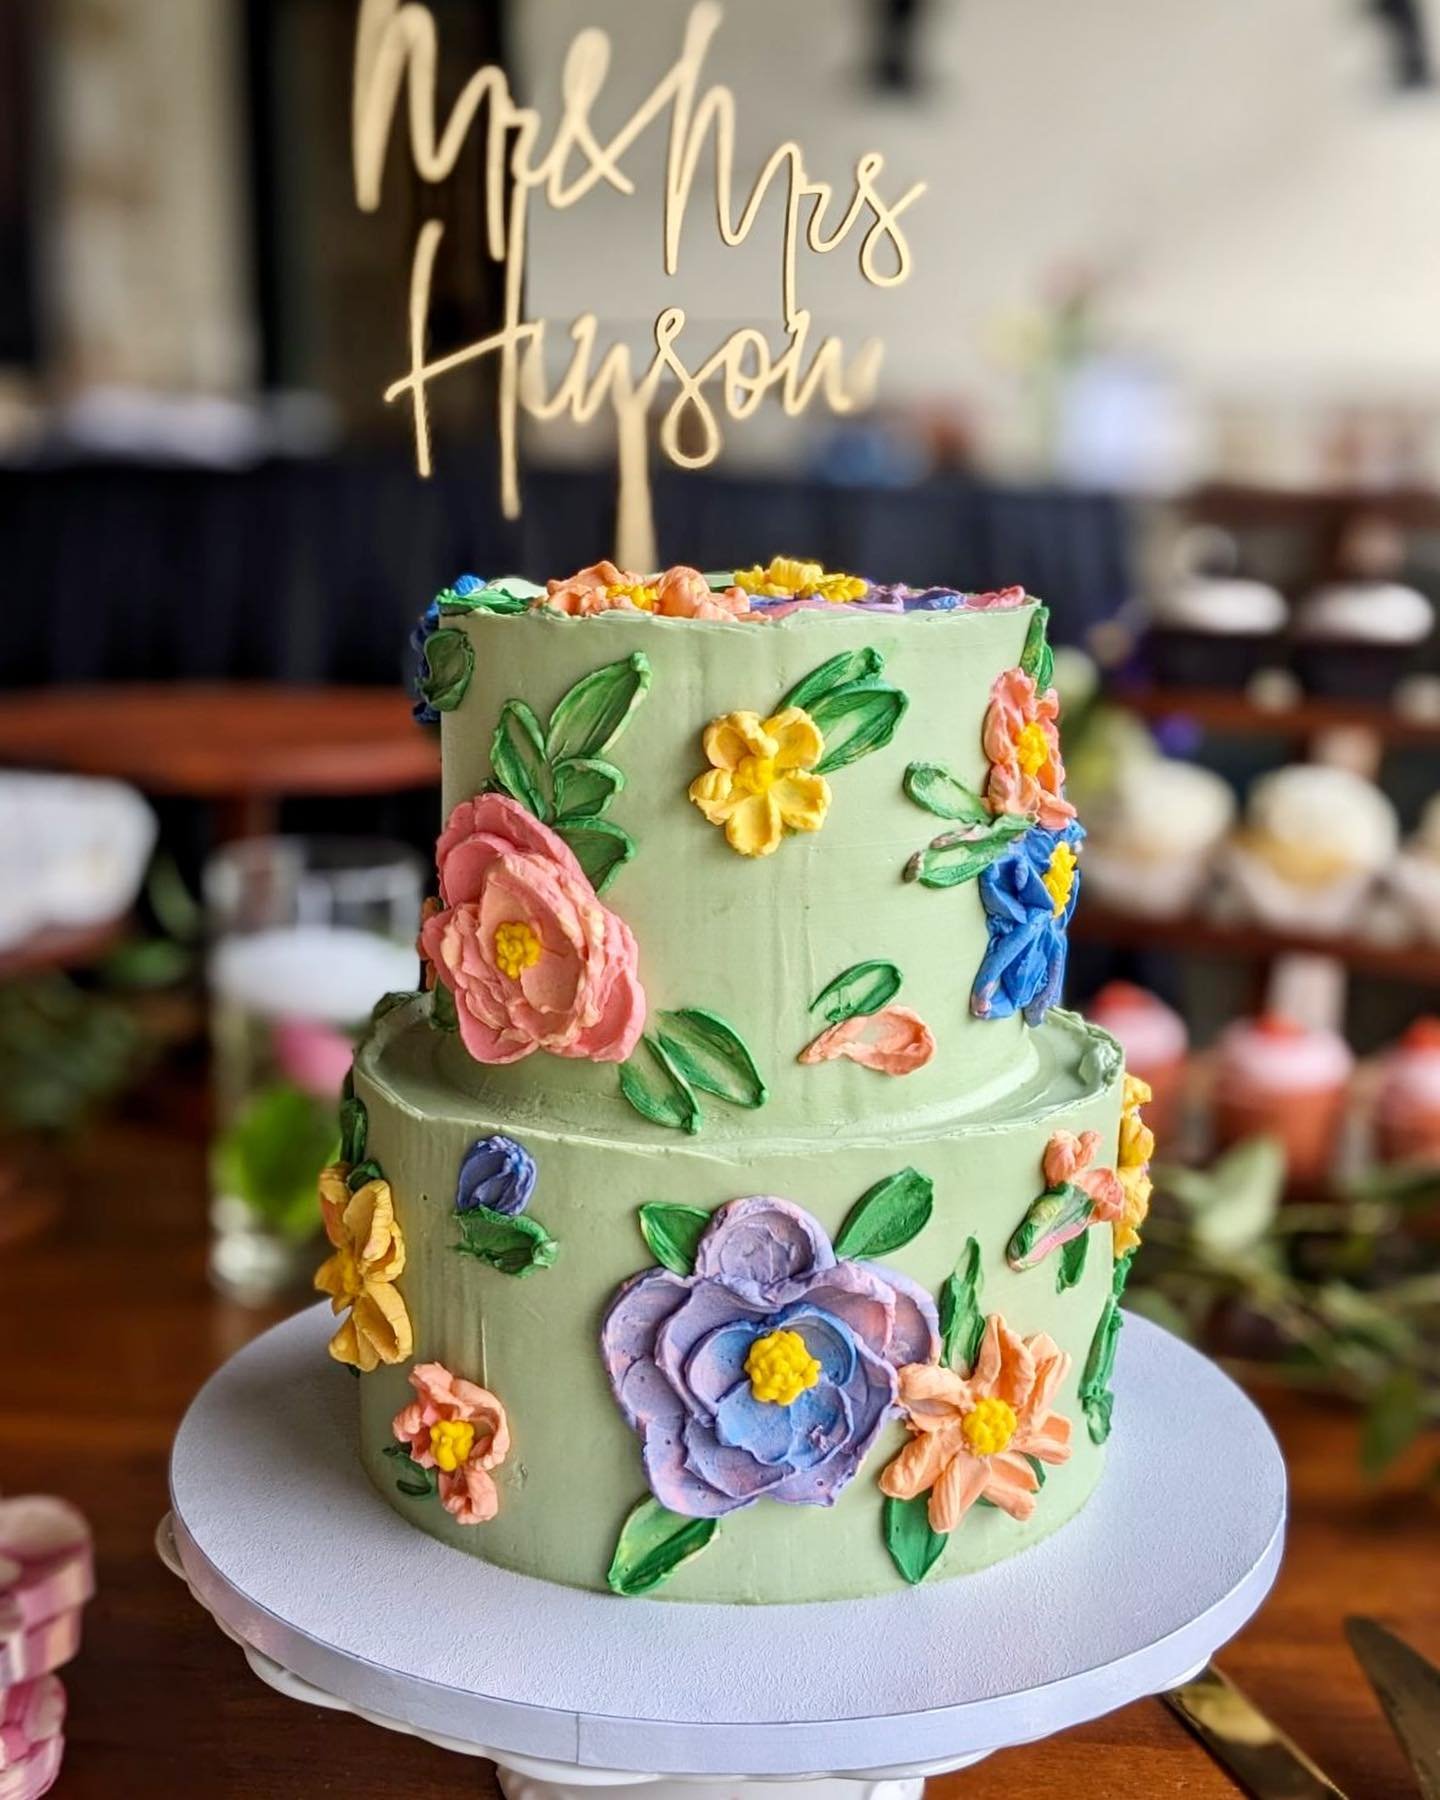 the sweetest palette knife florals for her and a big old fashioned for him! 🌸🥃💍

#mindysbakeshop #weddingcake #weddings #buttercream #buttercreamflowers #paletteknifepainting #oldfashioned #cocktails #baker #atxwedding #austin #atx #pastrychef #ca